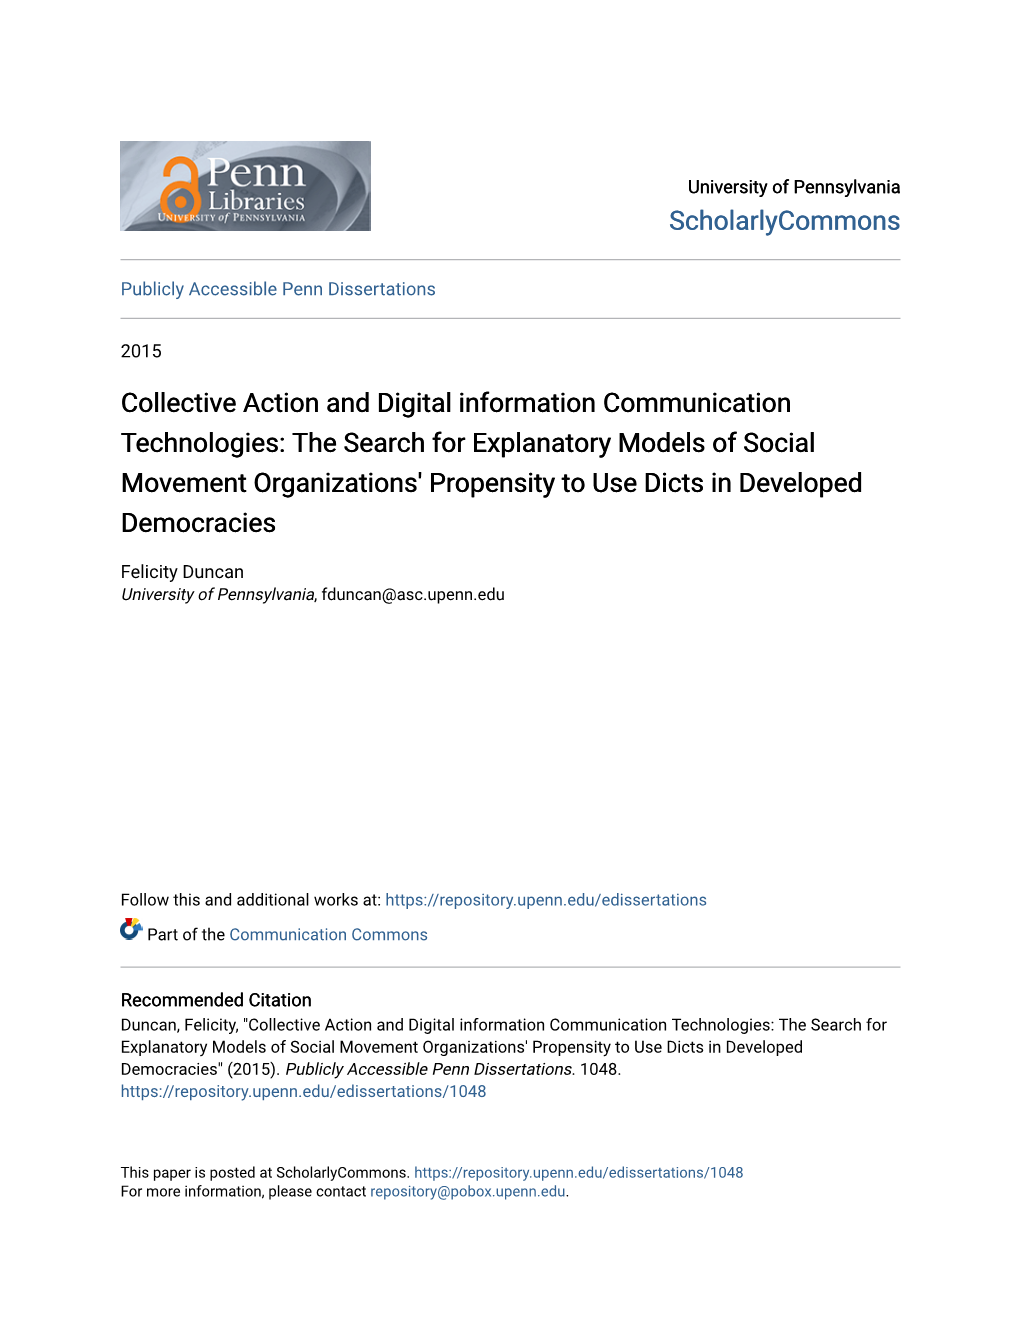 Collective Action and Digital Information